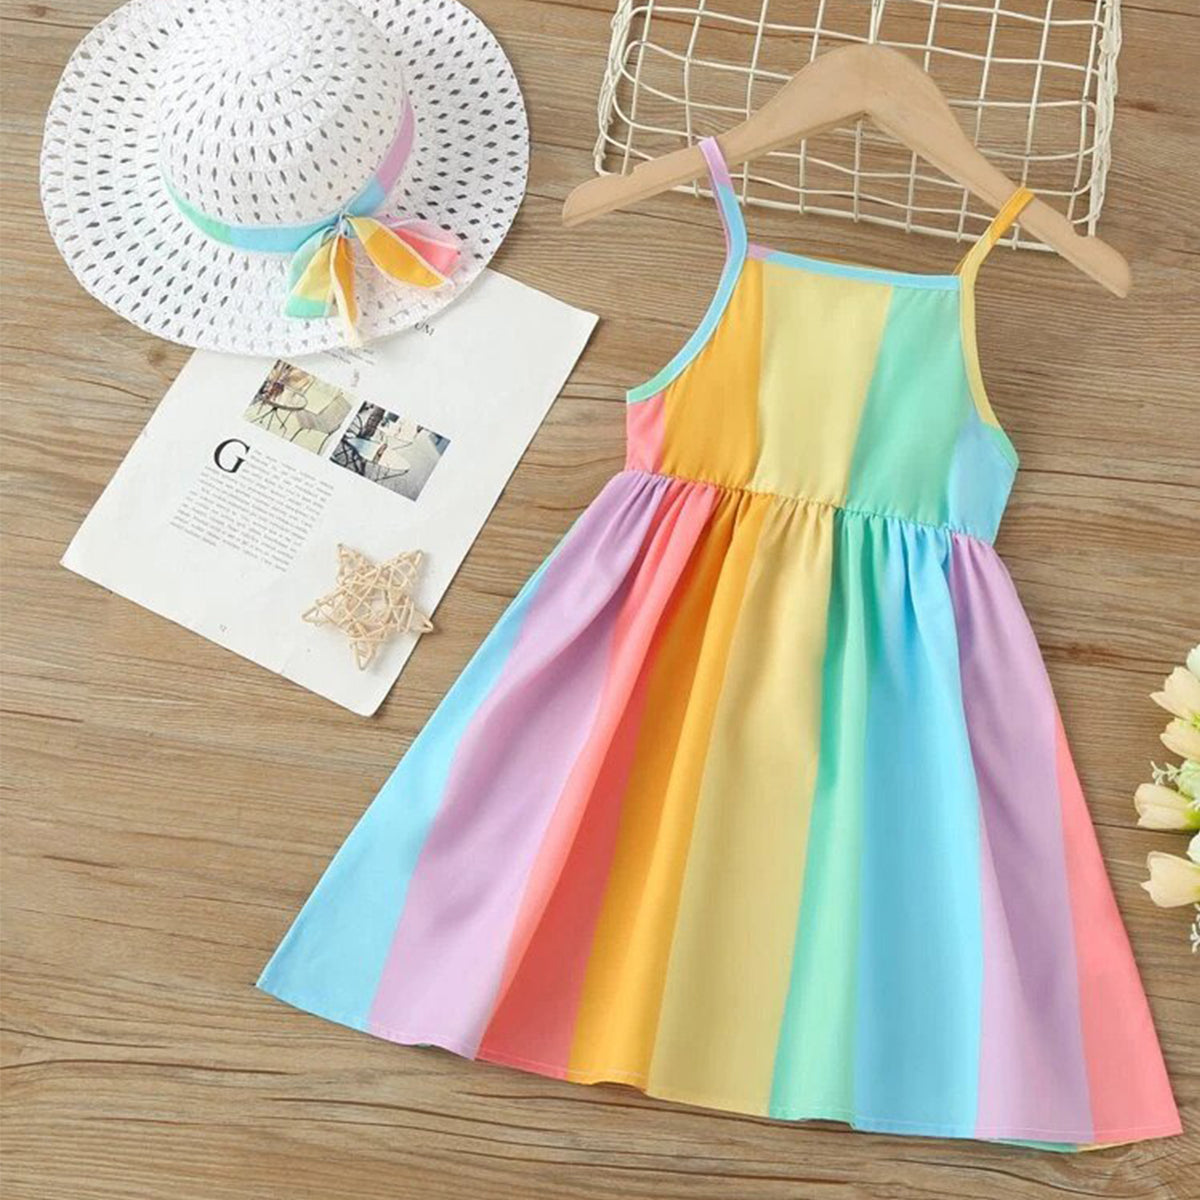 BabyGirl's Cotton Colorful Stripe Rainbow Lining Frocks & Dresses for Kids.